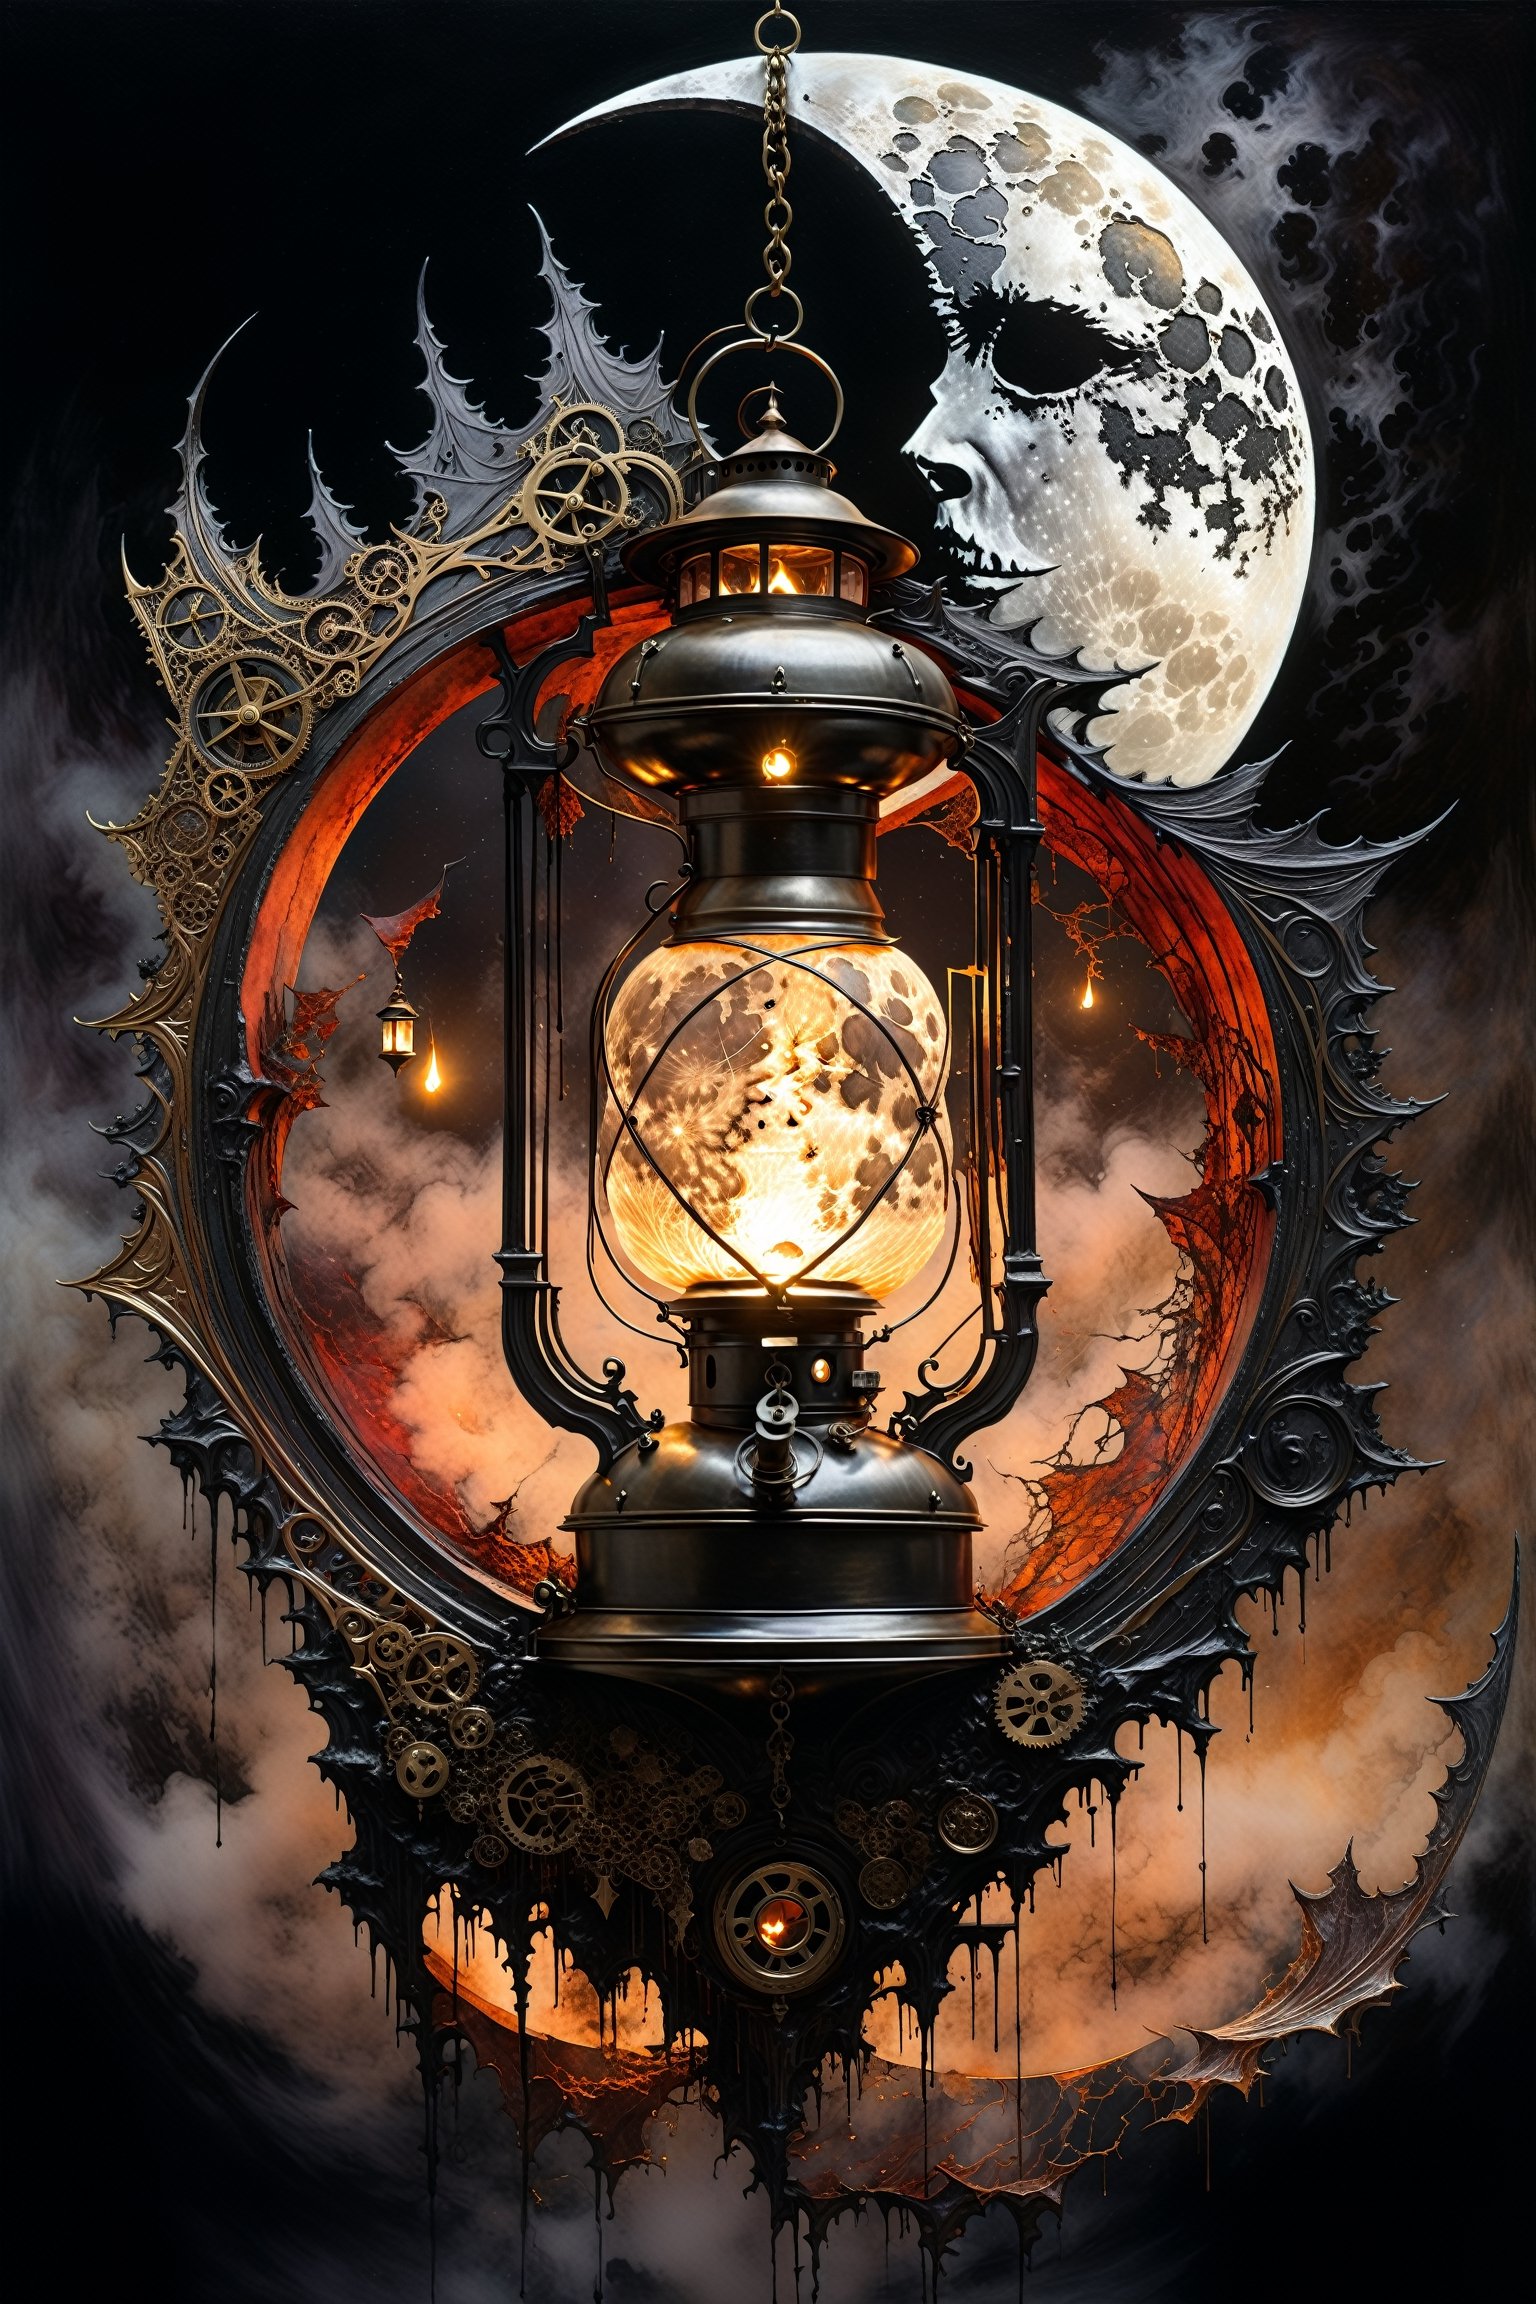 Ultra-wide-angle, photorealistic medieval gothic steam punk shot of an exciting fusion between Spawn and ((A spiderweb and a creepy The moon in Crescent form )), ((with a Oil lantern)) , eerie mysterious scene, dark, fantasy art, horror, sleepy hollow style, grimdark style, Movie Still, moody colours, undead,digital artwork by Beksinski )), in a new character that embodies elements of both, (((spiderwebs))), (((Street view))), silver mechanical gears in the background, people, see. Black and natural colors, ink Flow - 8k Resolution Photorealistic Masterpiece - by Aaron Horkey and Jeremy Mann - Intricately Detailed. fluid gouache painting: by Jean Baptiste Mongue: calligraphy: acrylic: colorful watercolor, cinematic lighting, maximalist photoillustration: by marton bobzert: 8k resolution concept art, intricately detailed realism, complex, elegant, expansive, fantastical and psychedelic, dripping paint , in the chasm of the empire estate, night, the moon, buildings, reflections, wings, and other elements need to stay in frame,(isolate object)